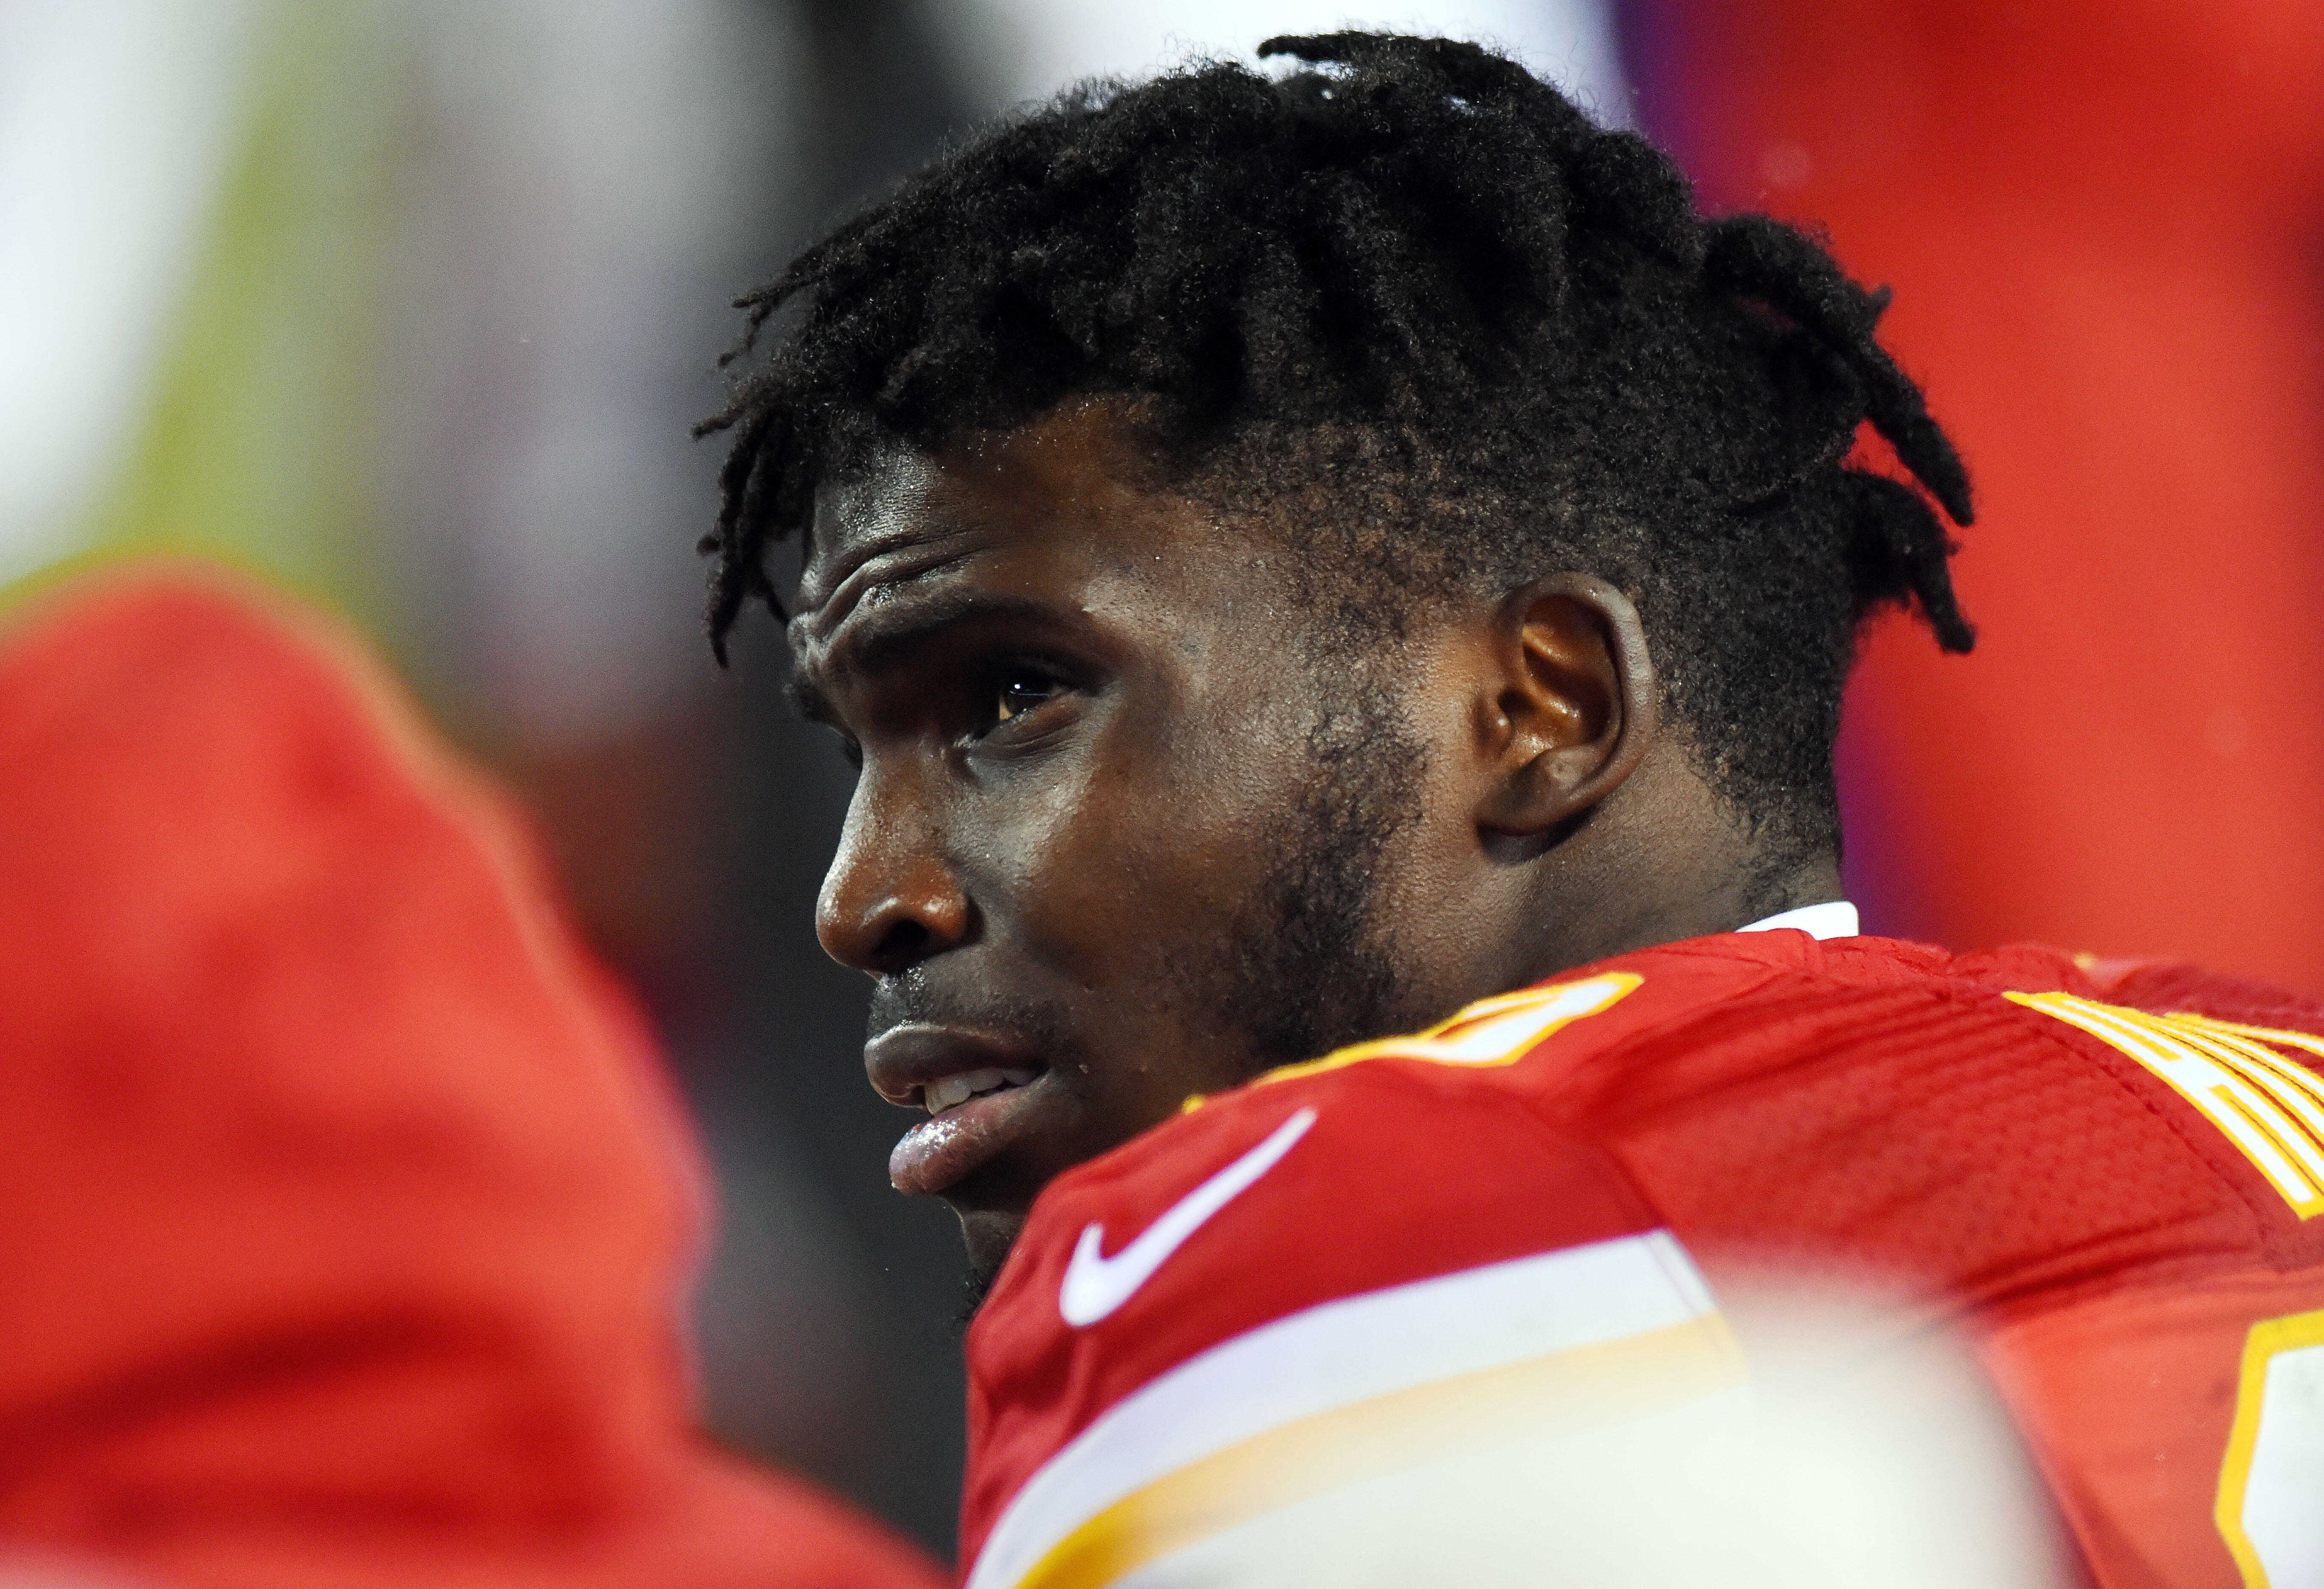 KANSAS CITY, MO - DECEMBER 25:  Tyreek Hill #10 of the Kansas City Chiefs watches a reply from the bench after scoring during the 1st quarter of the game against the Denver Broncos at Arrowhead Stadium on December 25, 2016 in Kansas City, Missouri.  (Phot